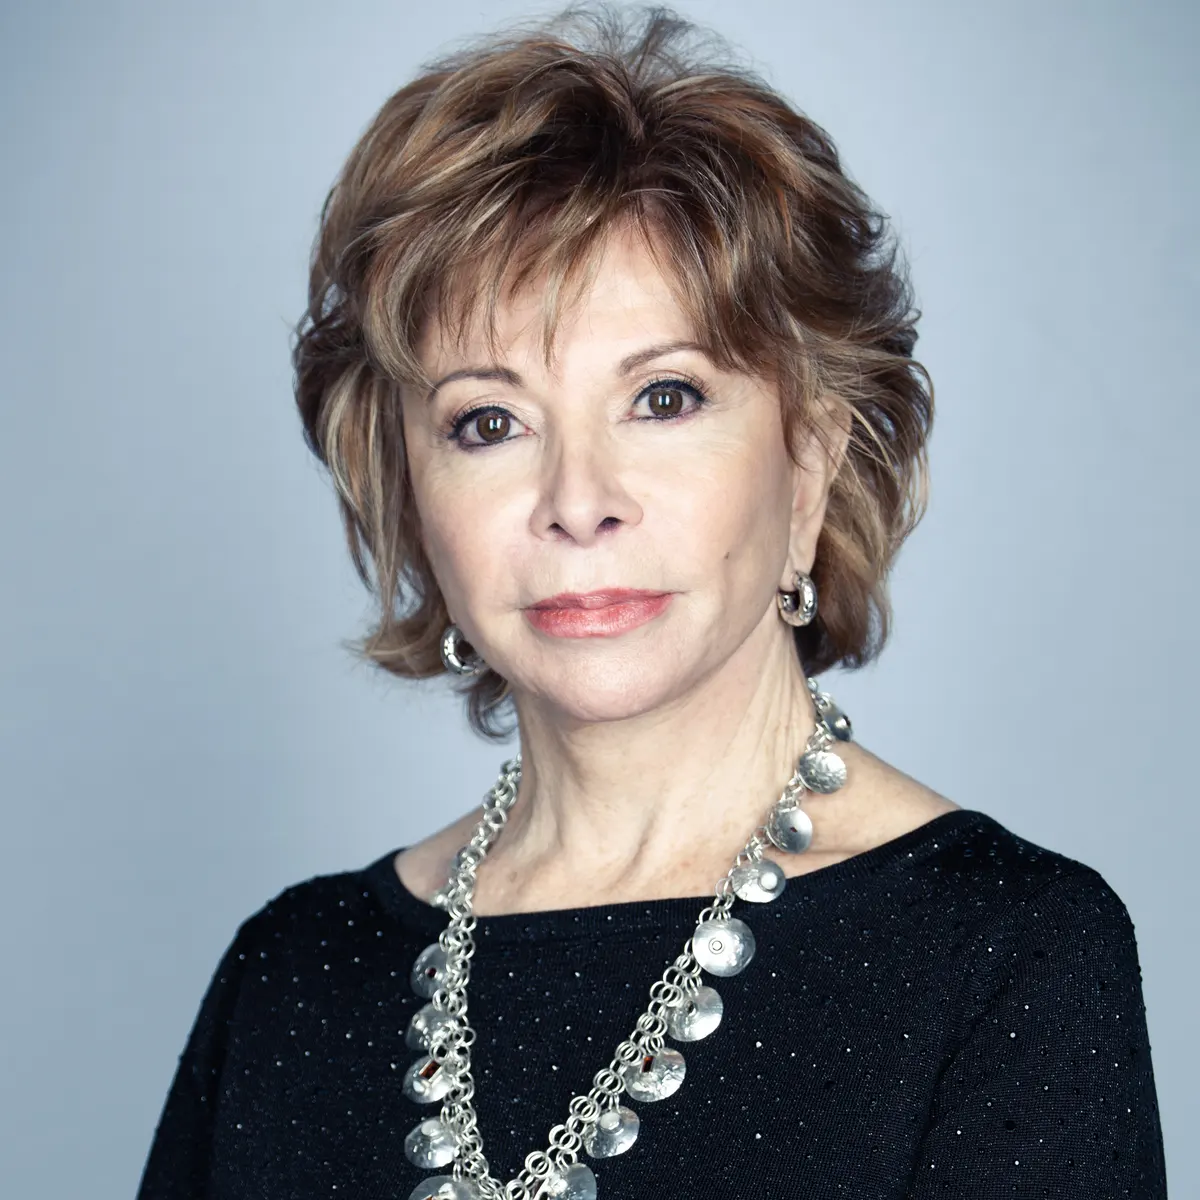 How rich is Isabel Allende?